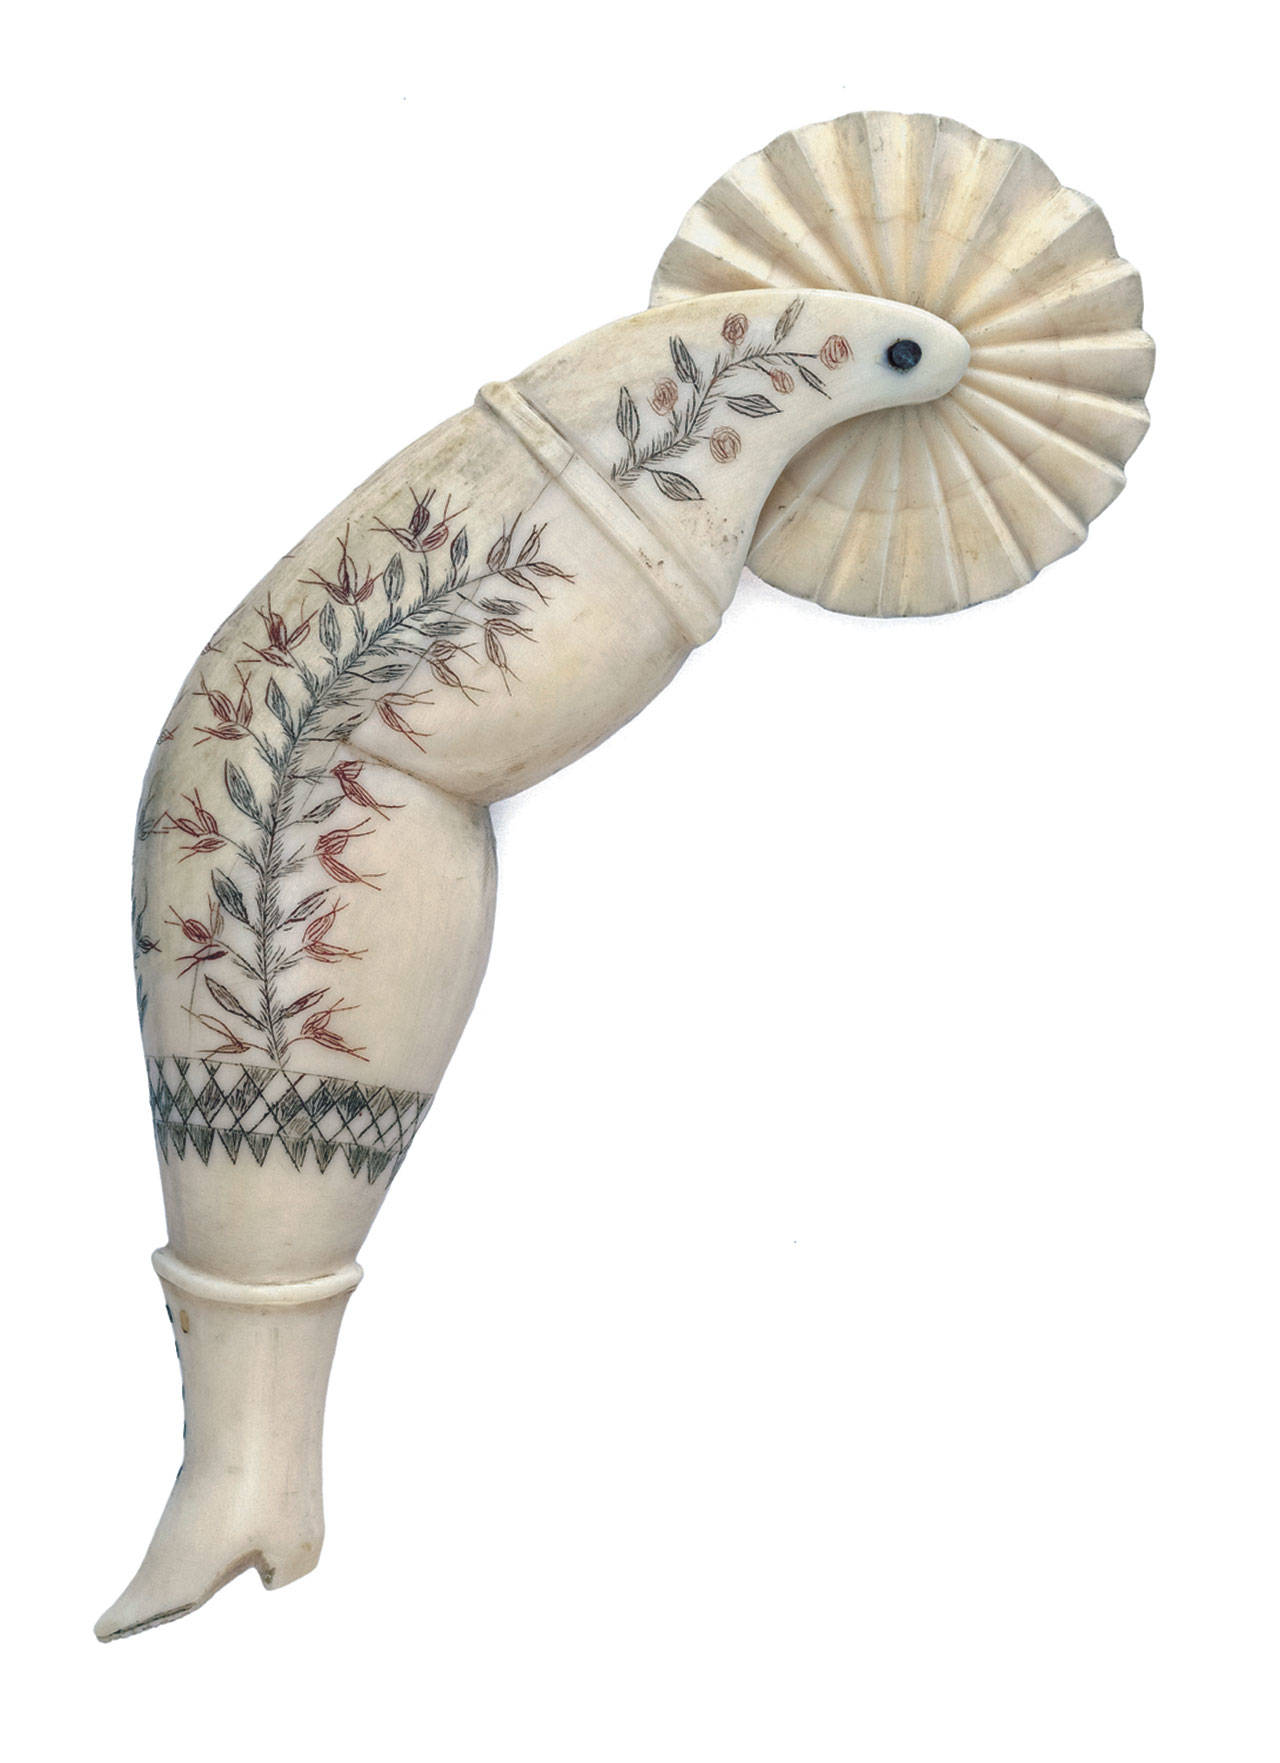 This ivory pie crimper was made in the 1800s by a sailor and sold at an Eldred’s auction recently for $3,600. It is a piece of folk art with several suggested explanations of the design. (Cowles Syndicate Inc.)